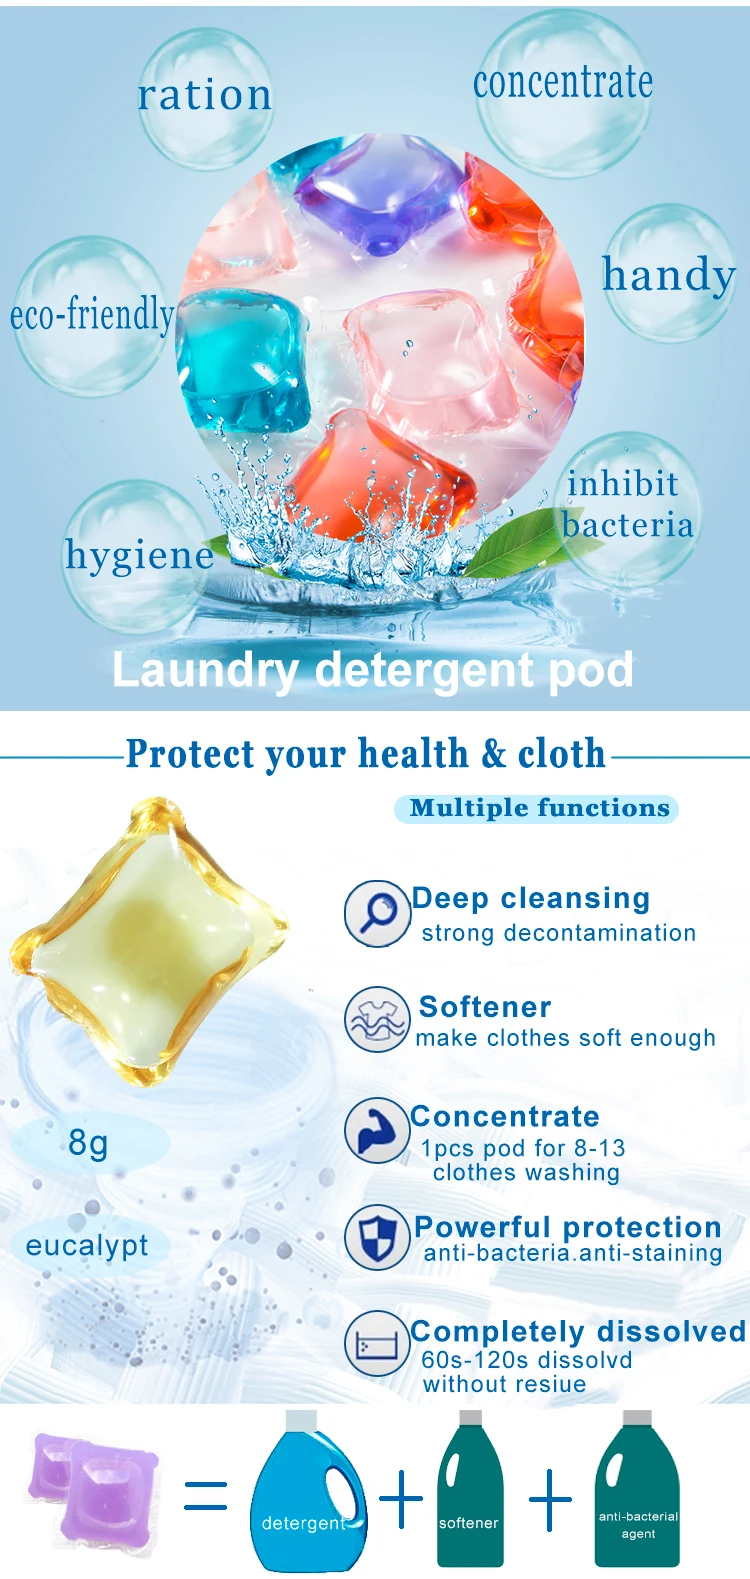 China Hot Sale Good Qualitynteco fragrance booster laundry care long-lasting freshness capsule laundry detergent